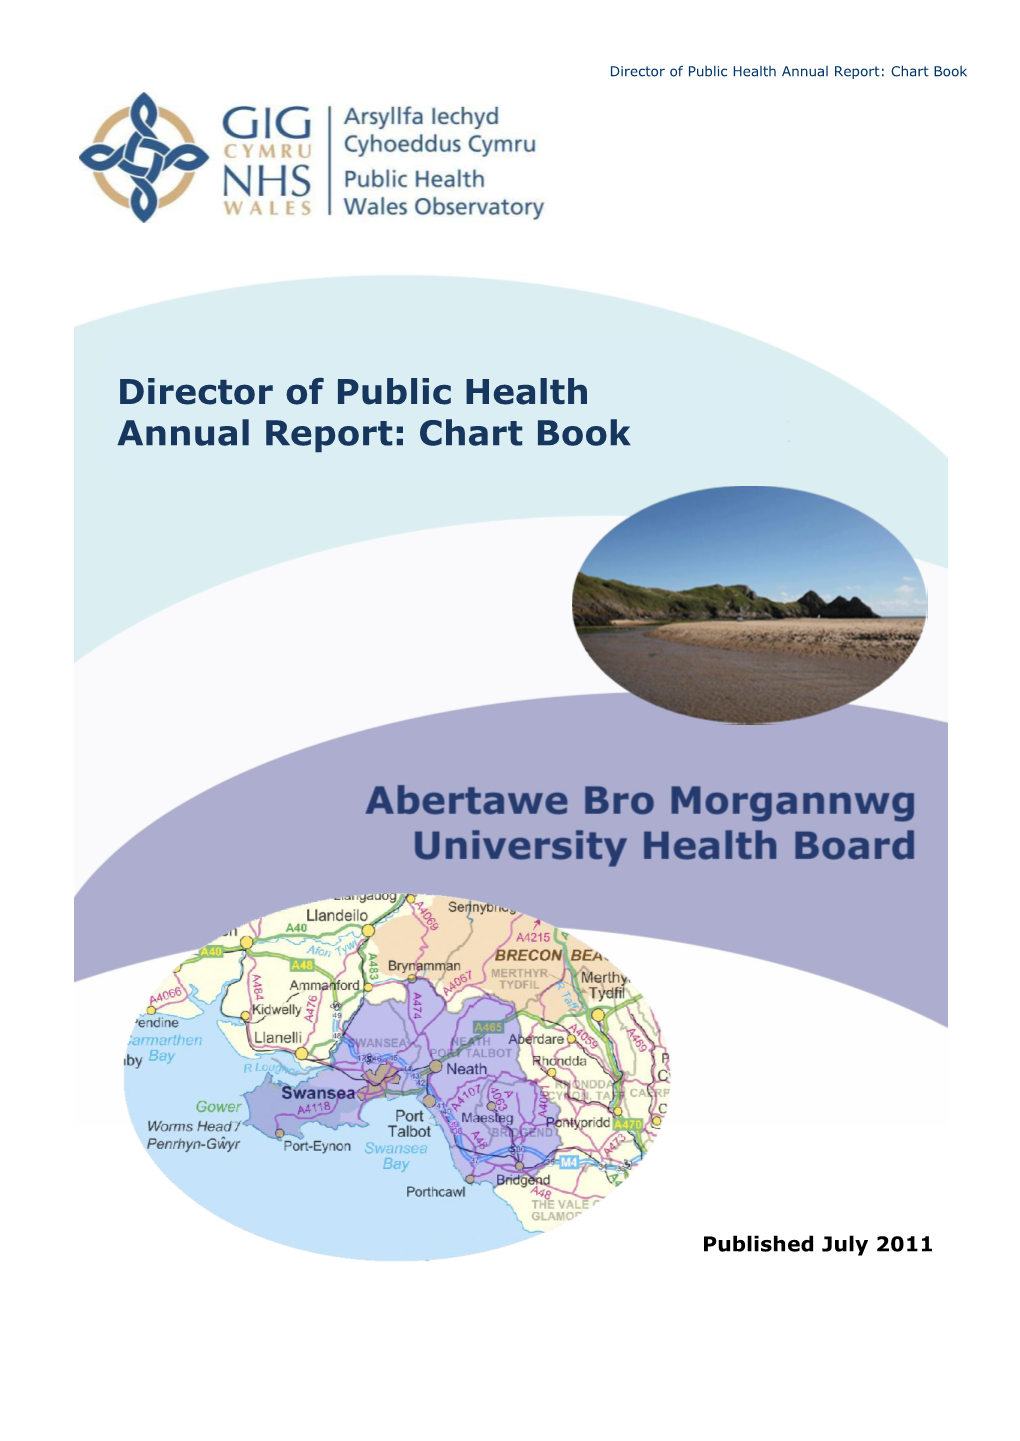 Director of Public Health Annual Report: Chart Book for Abertawe